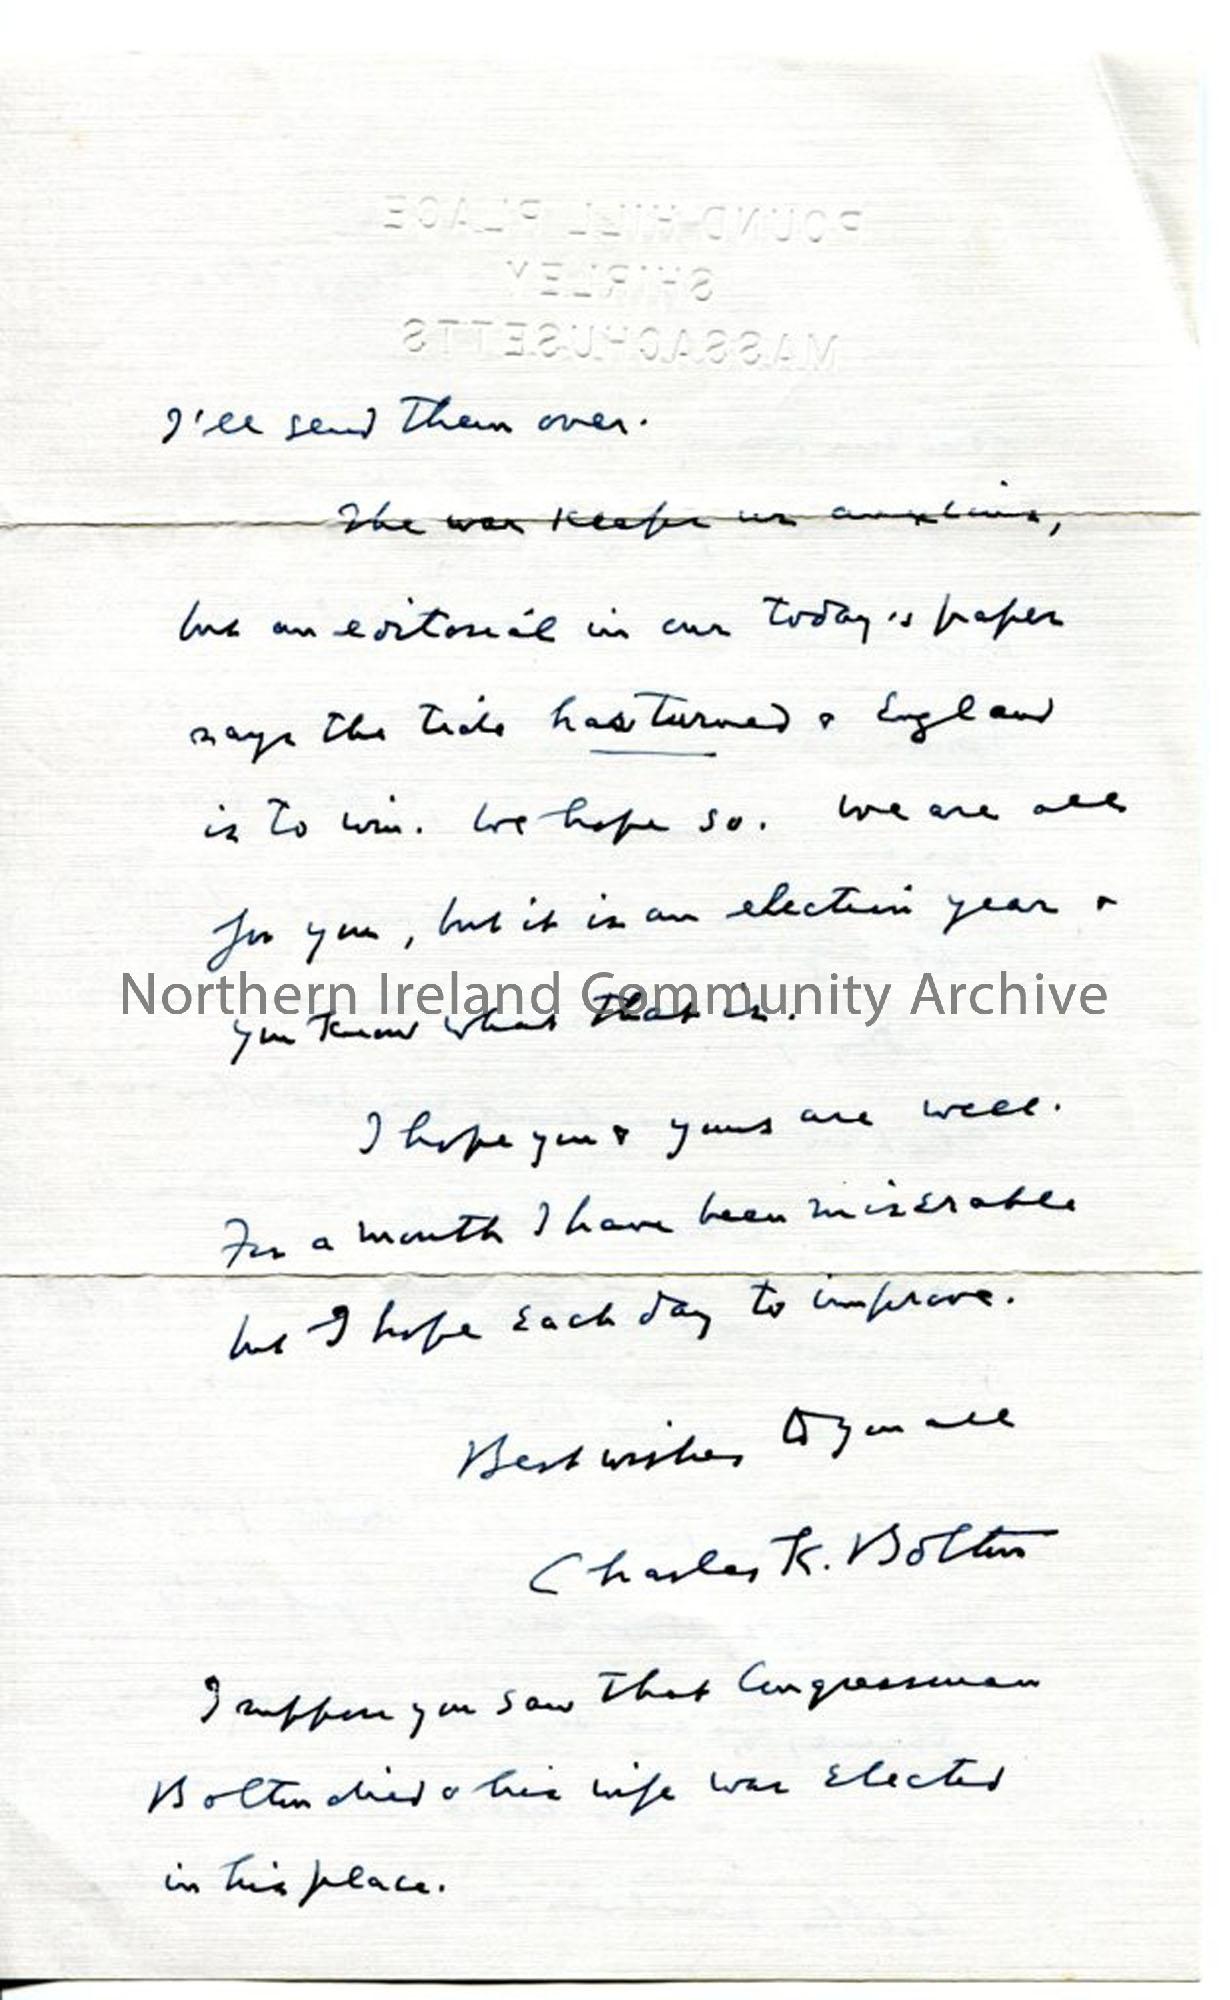 Page 2 of 2: Letter from Charles K Bolton, dated 25.9.1940